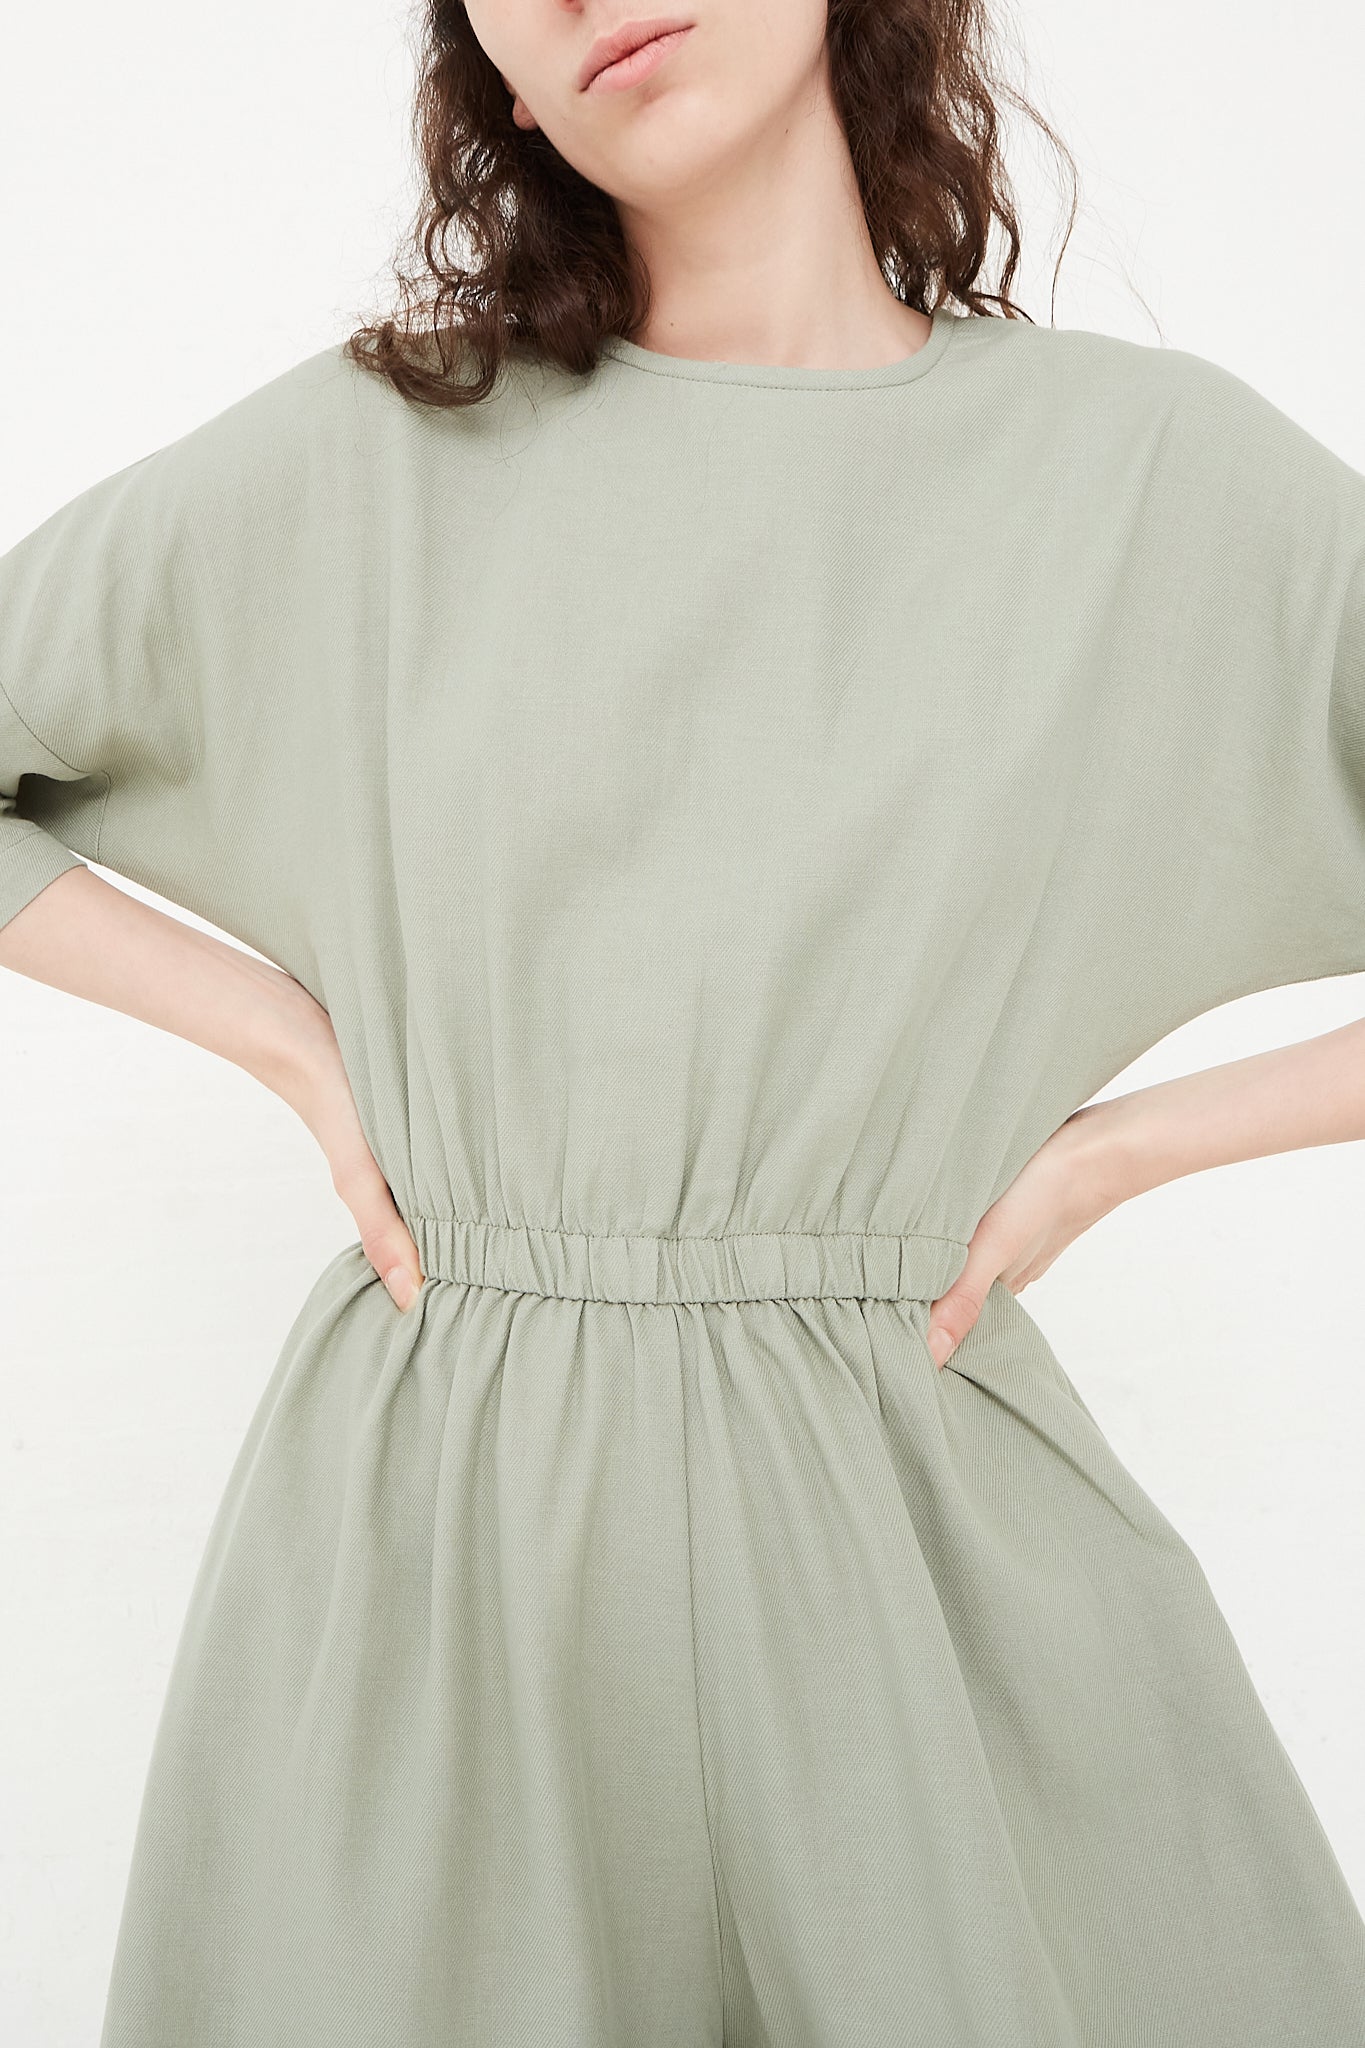 The model is wearing a sage green Cotton Twill Wide Culotte Jumpsuit in Agave by Black Crane with an elasticated waist and long sleeves.